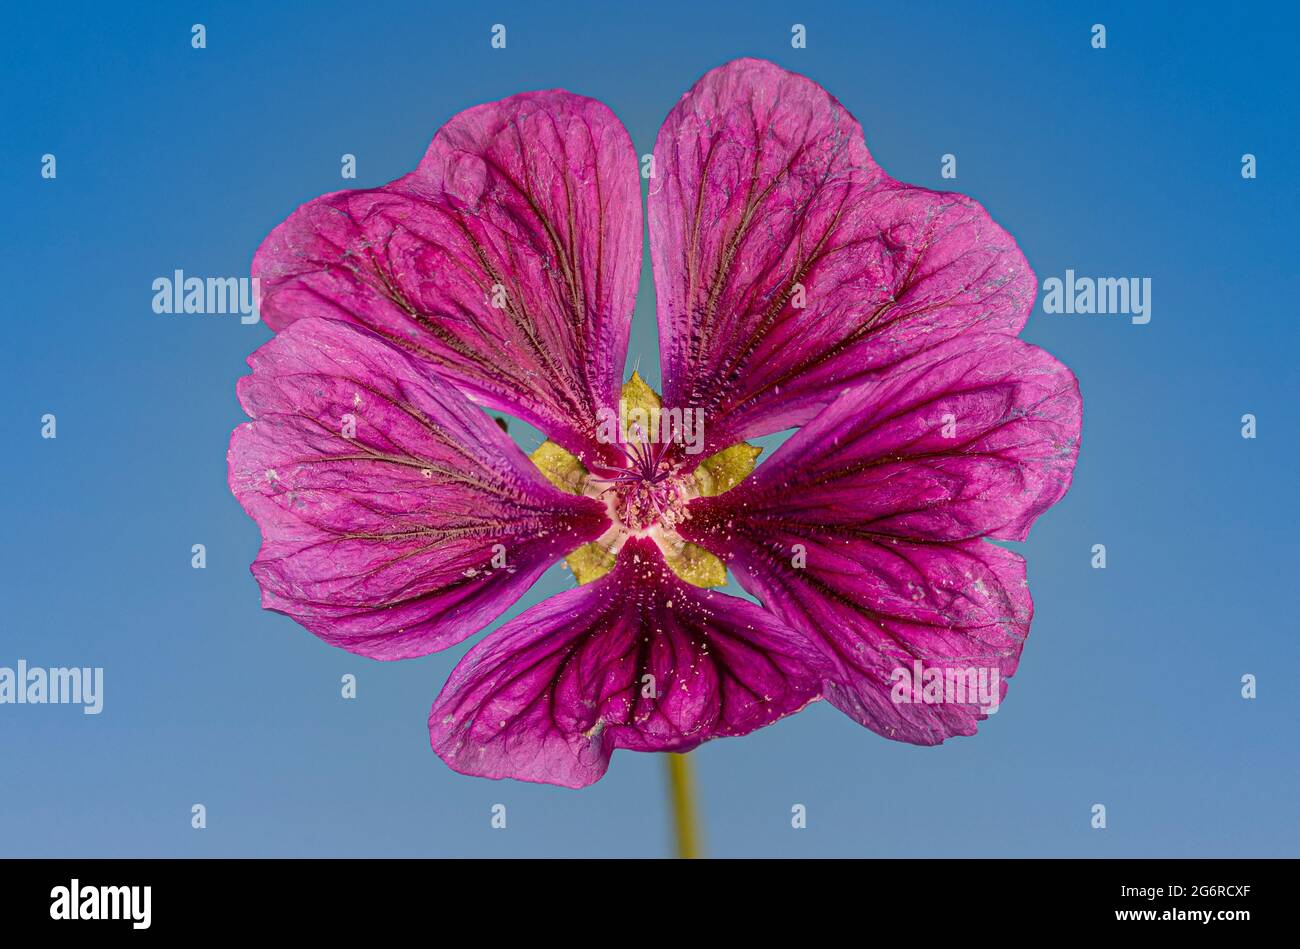 Macro photograph of an isolated pink common mallow flower against the blue sky Stock Photo